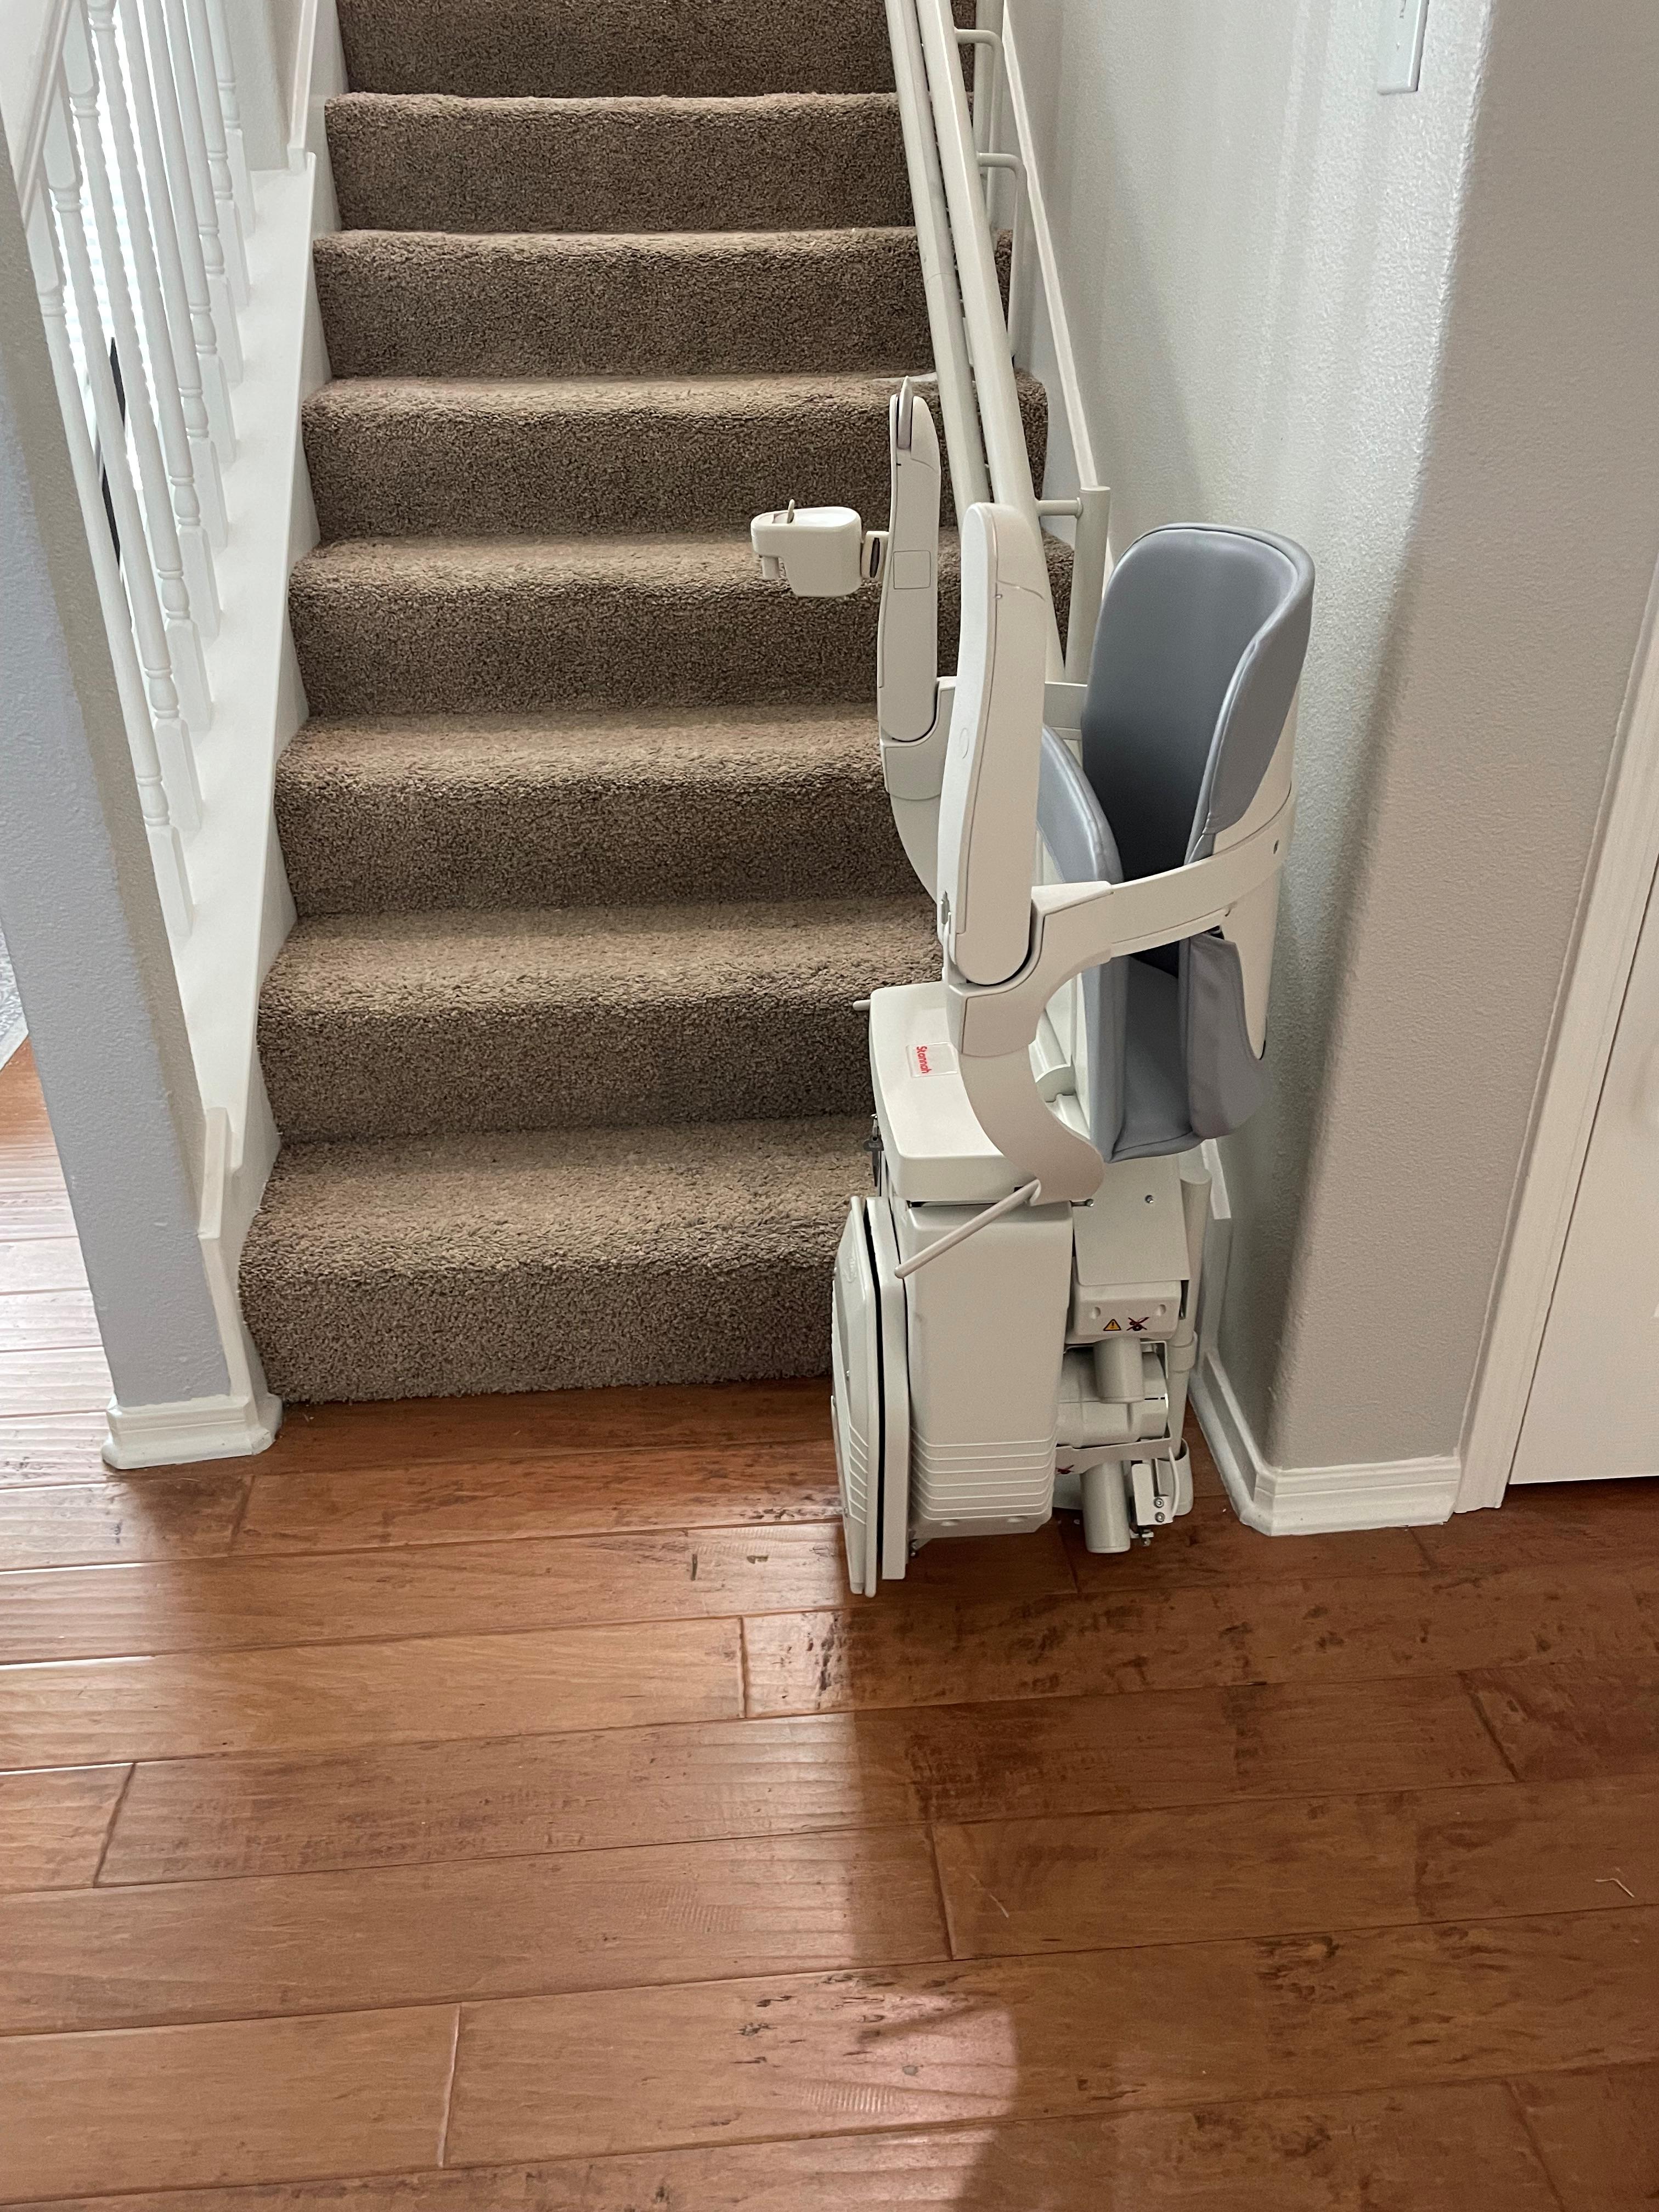 Stairlift folded up and out of the way.